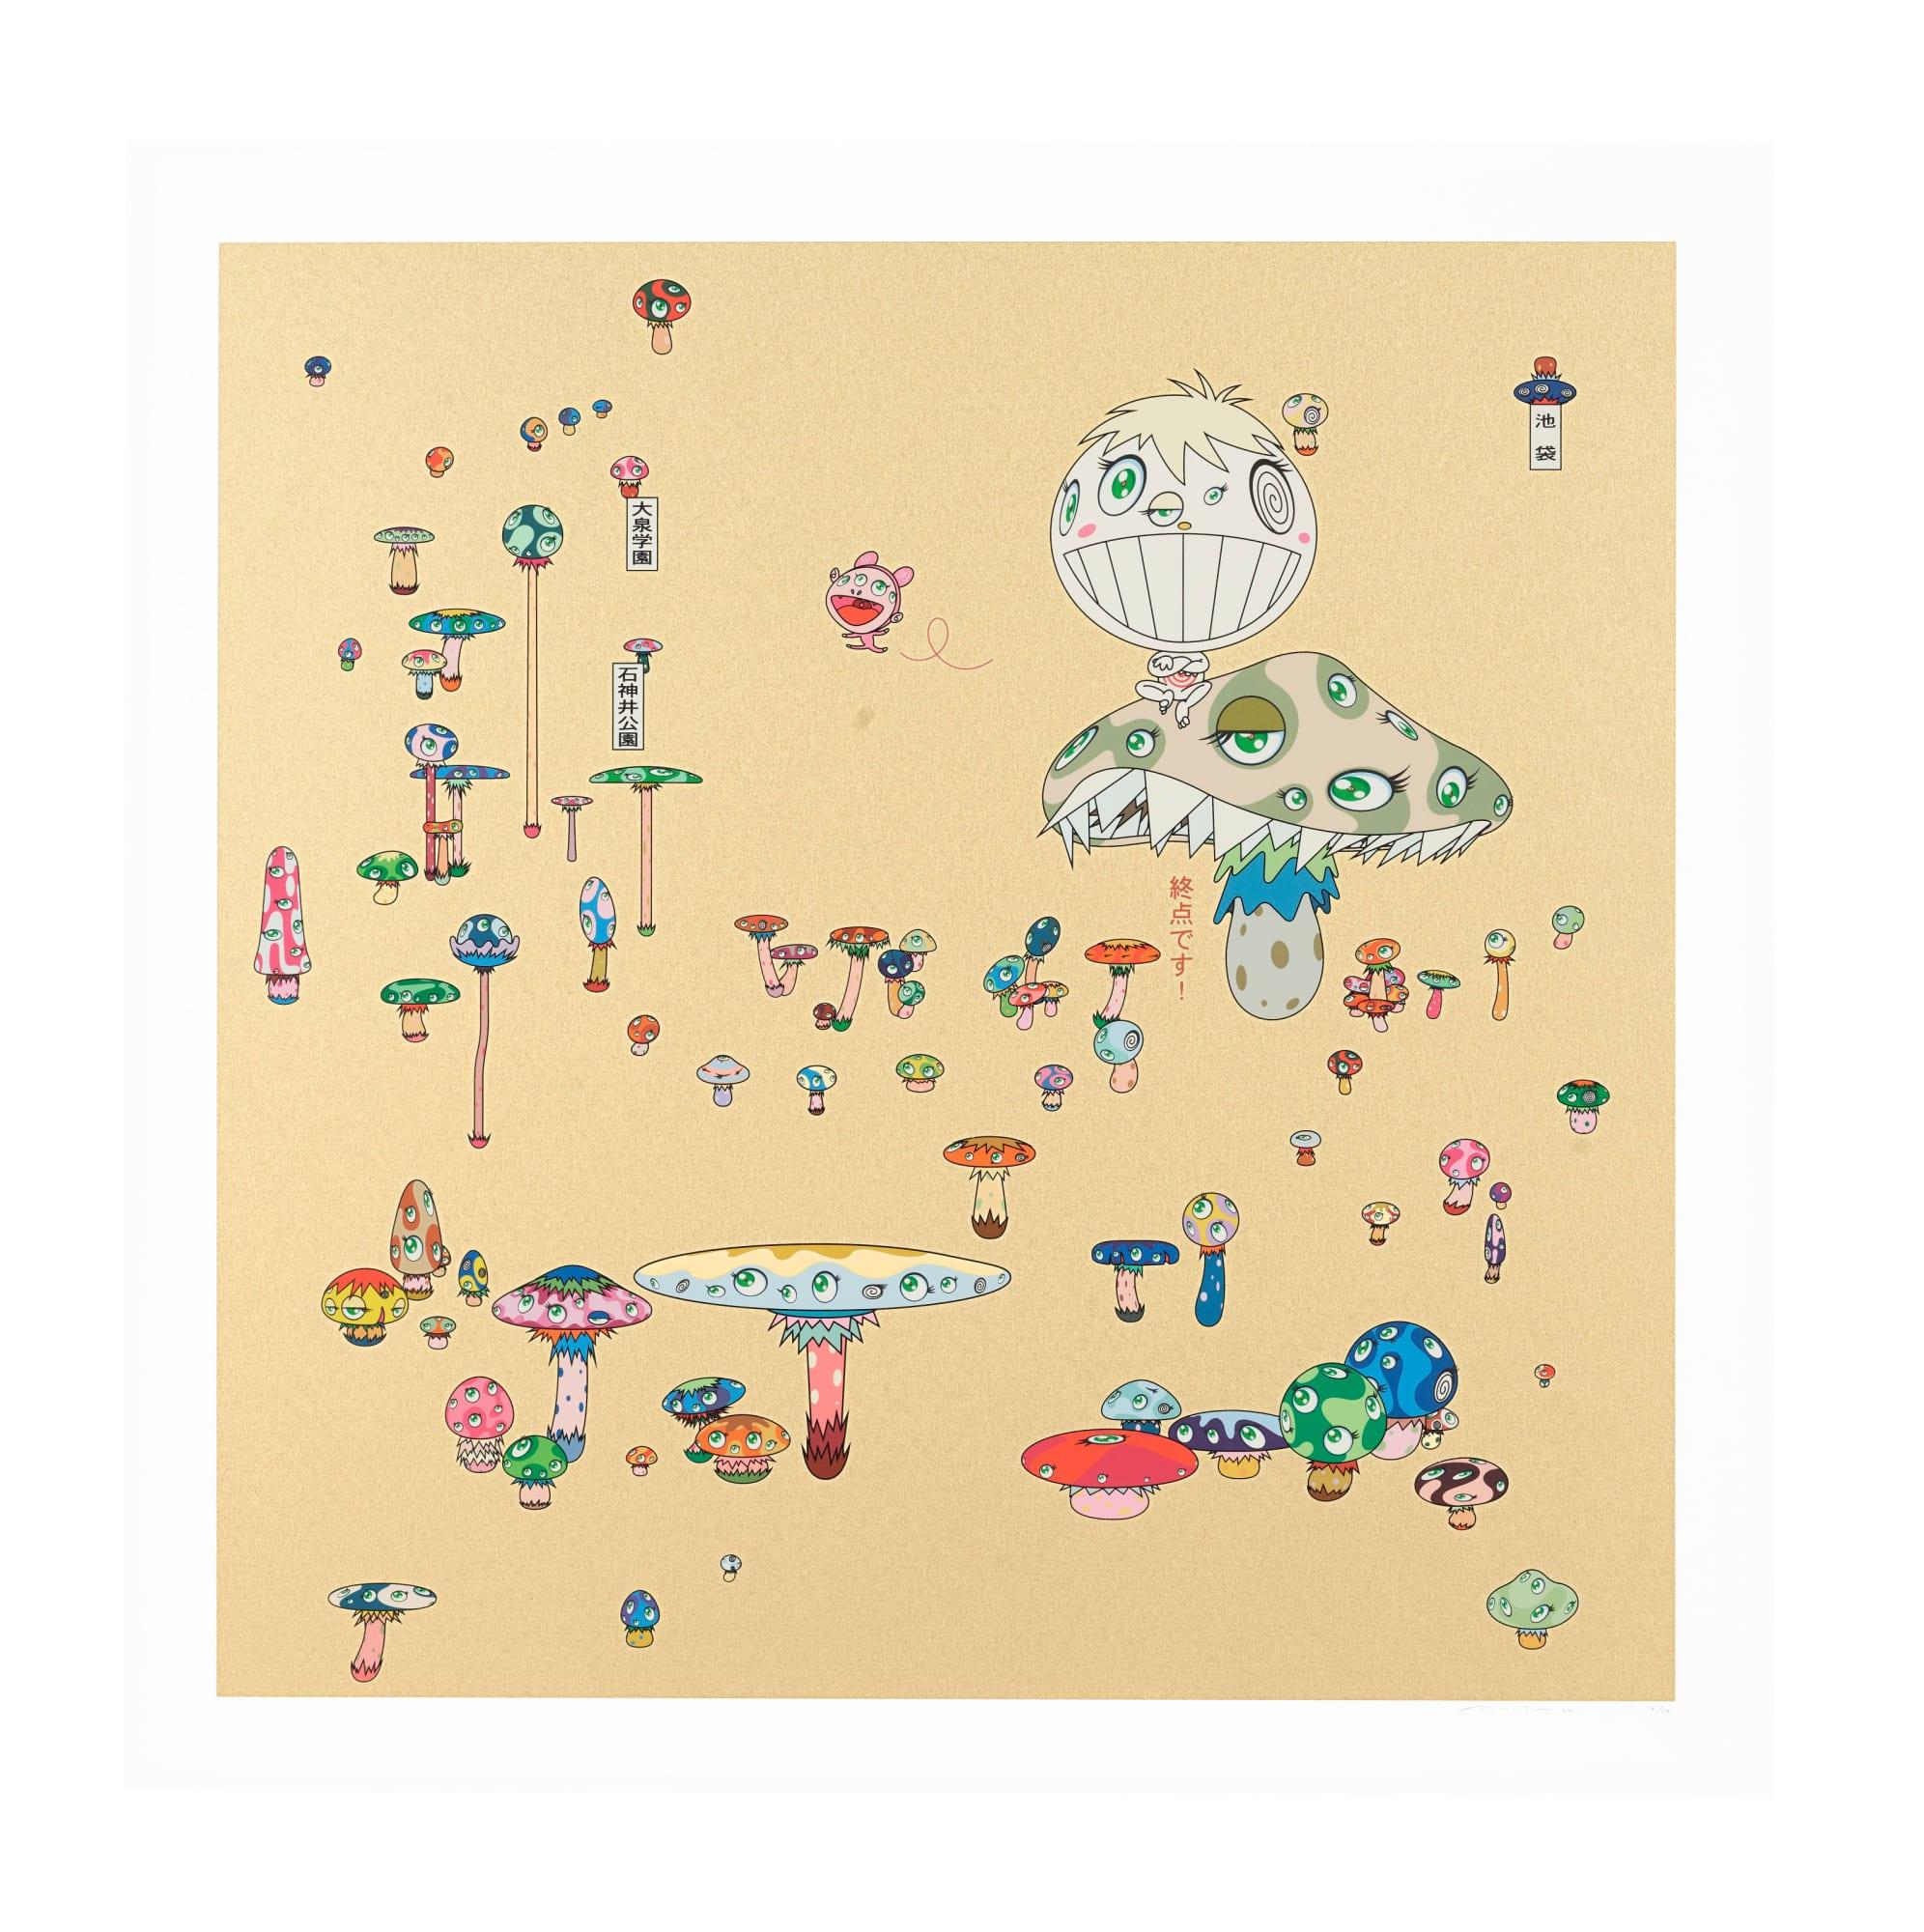 Making a U-Turn, The Lost Child Finds His Way Home, by Takashi Murakami